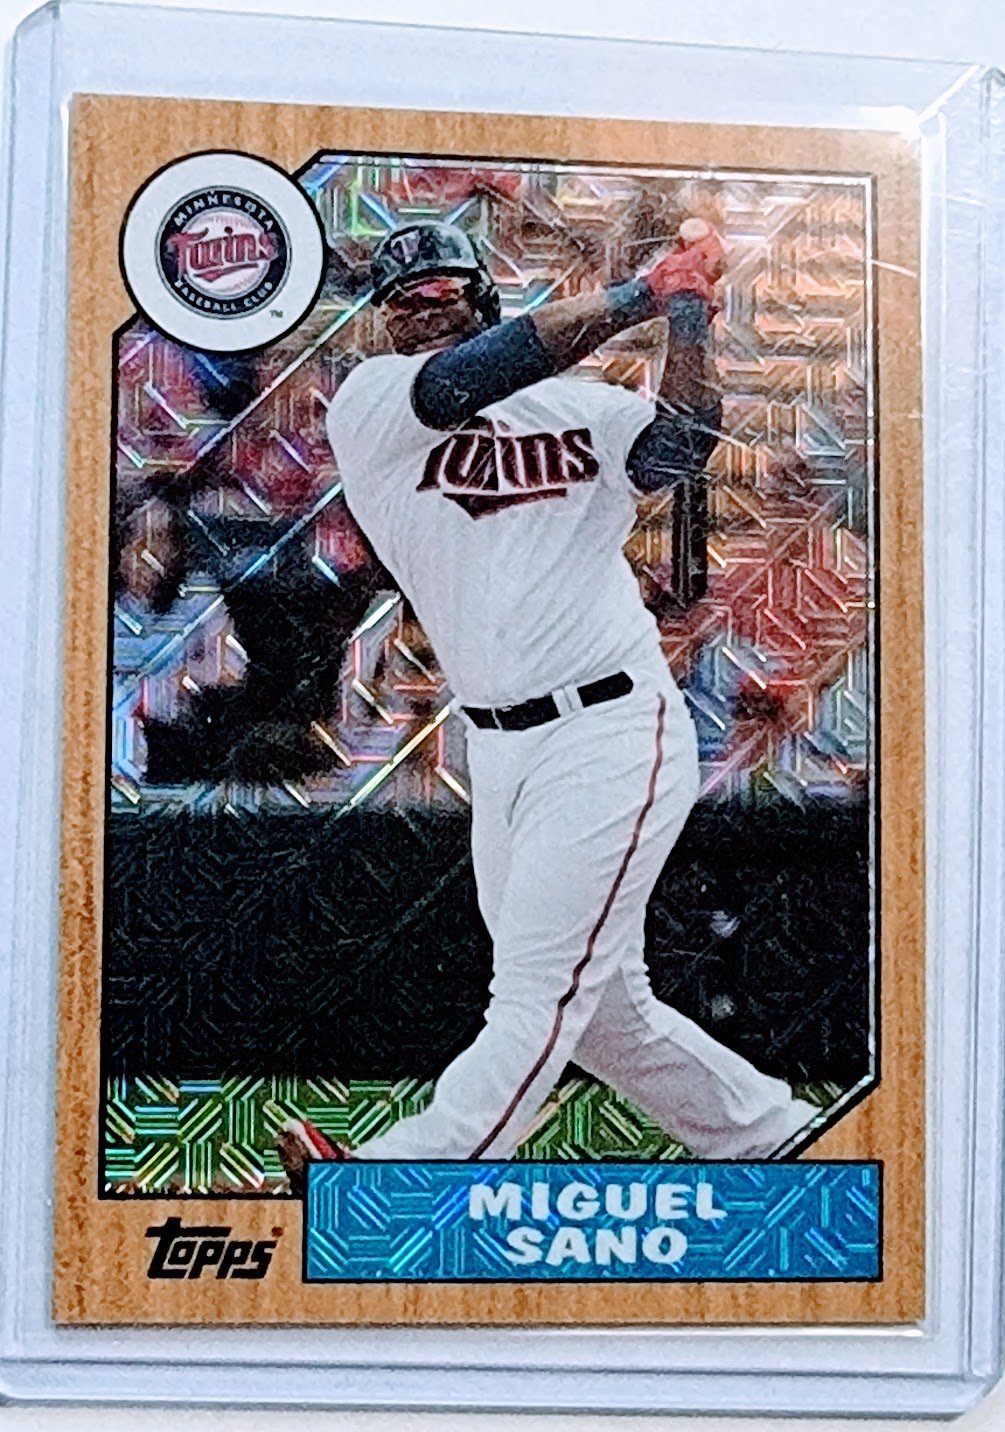 2017 Topps Miguel Sano Mojo Silver Pack Refractor Baseball Card TPTV simple Xclusive Collectibles   